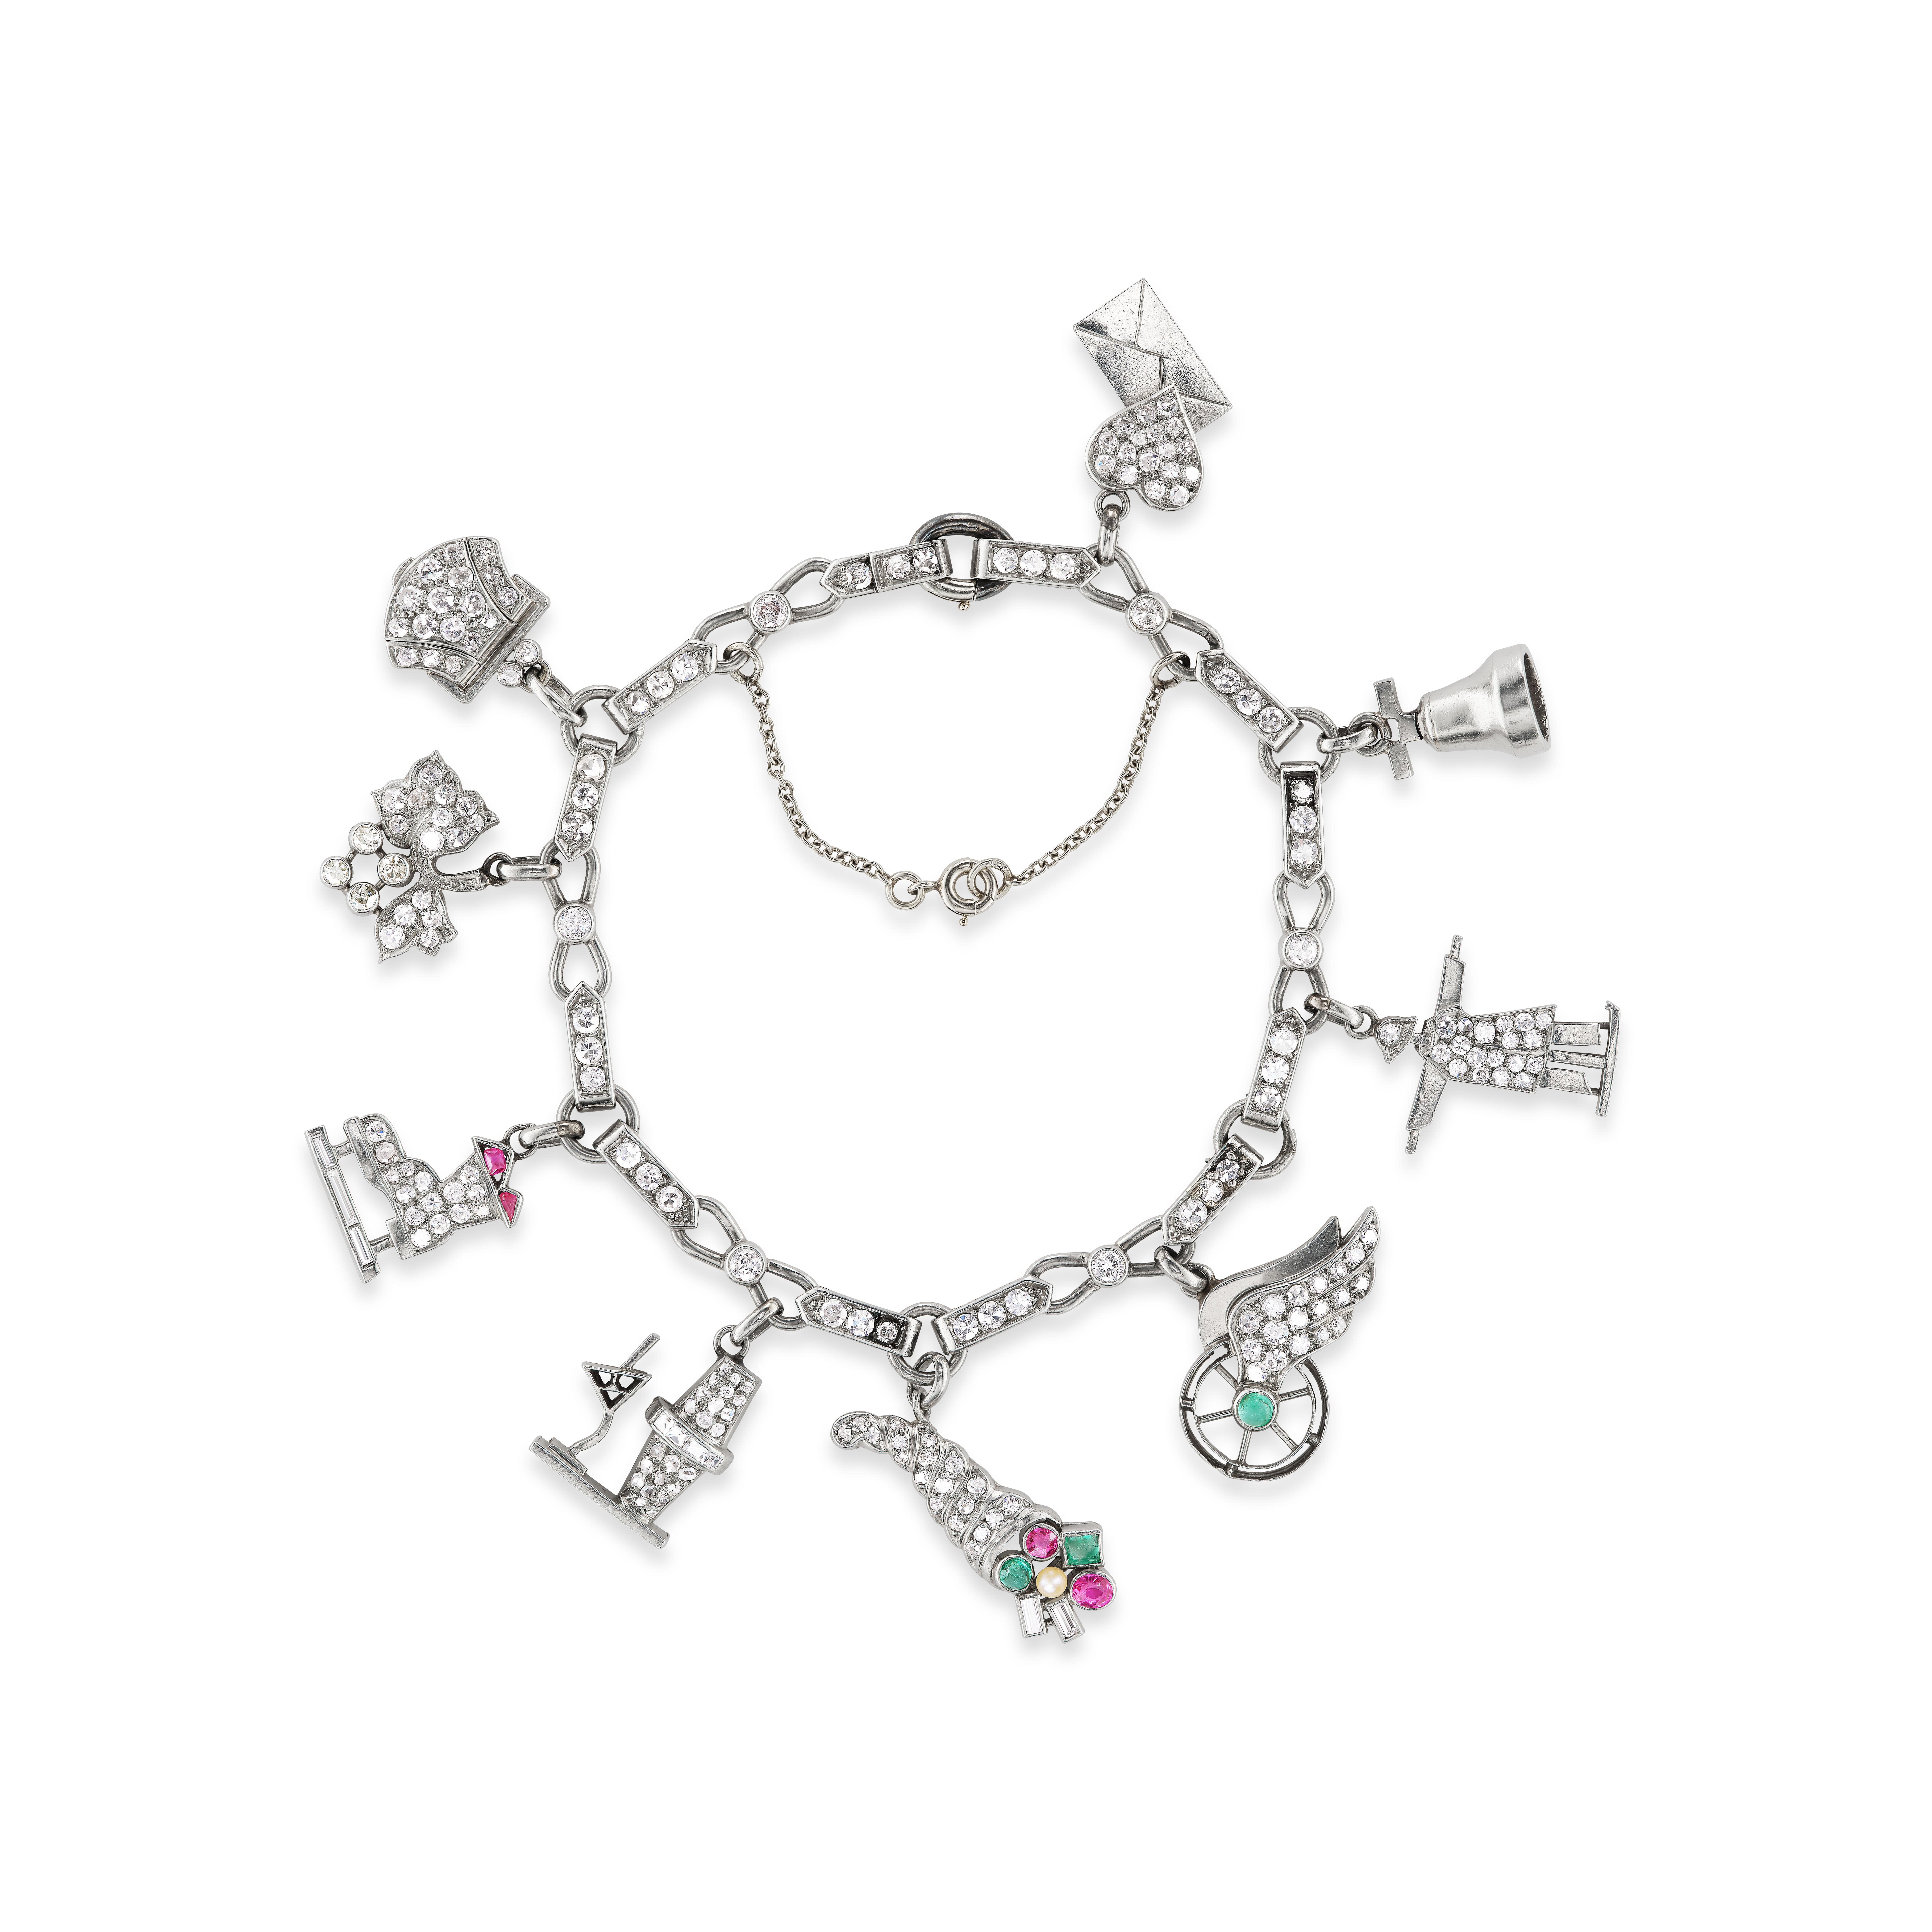 This cheerful holiday-themed charm bracelet is adorned by 9 figures enhanced with diamonds, rubies, and emeralds. There is a purse, an ice skate, and a Christmas stocking, but our favorite is the martini shaker and glass. 